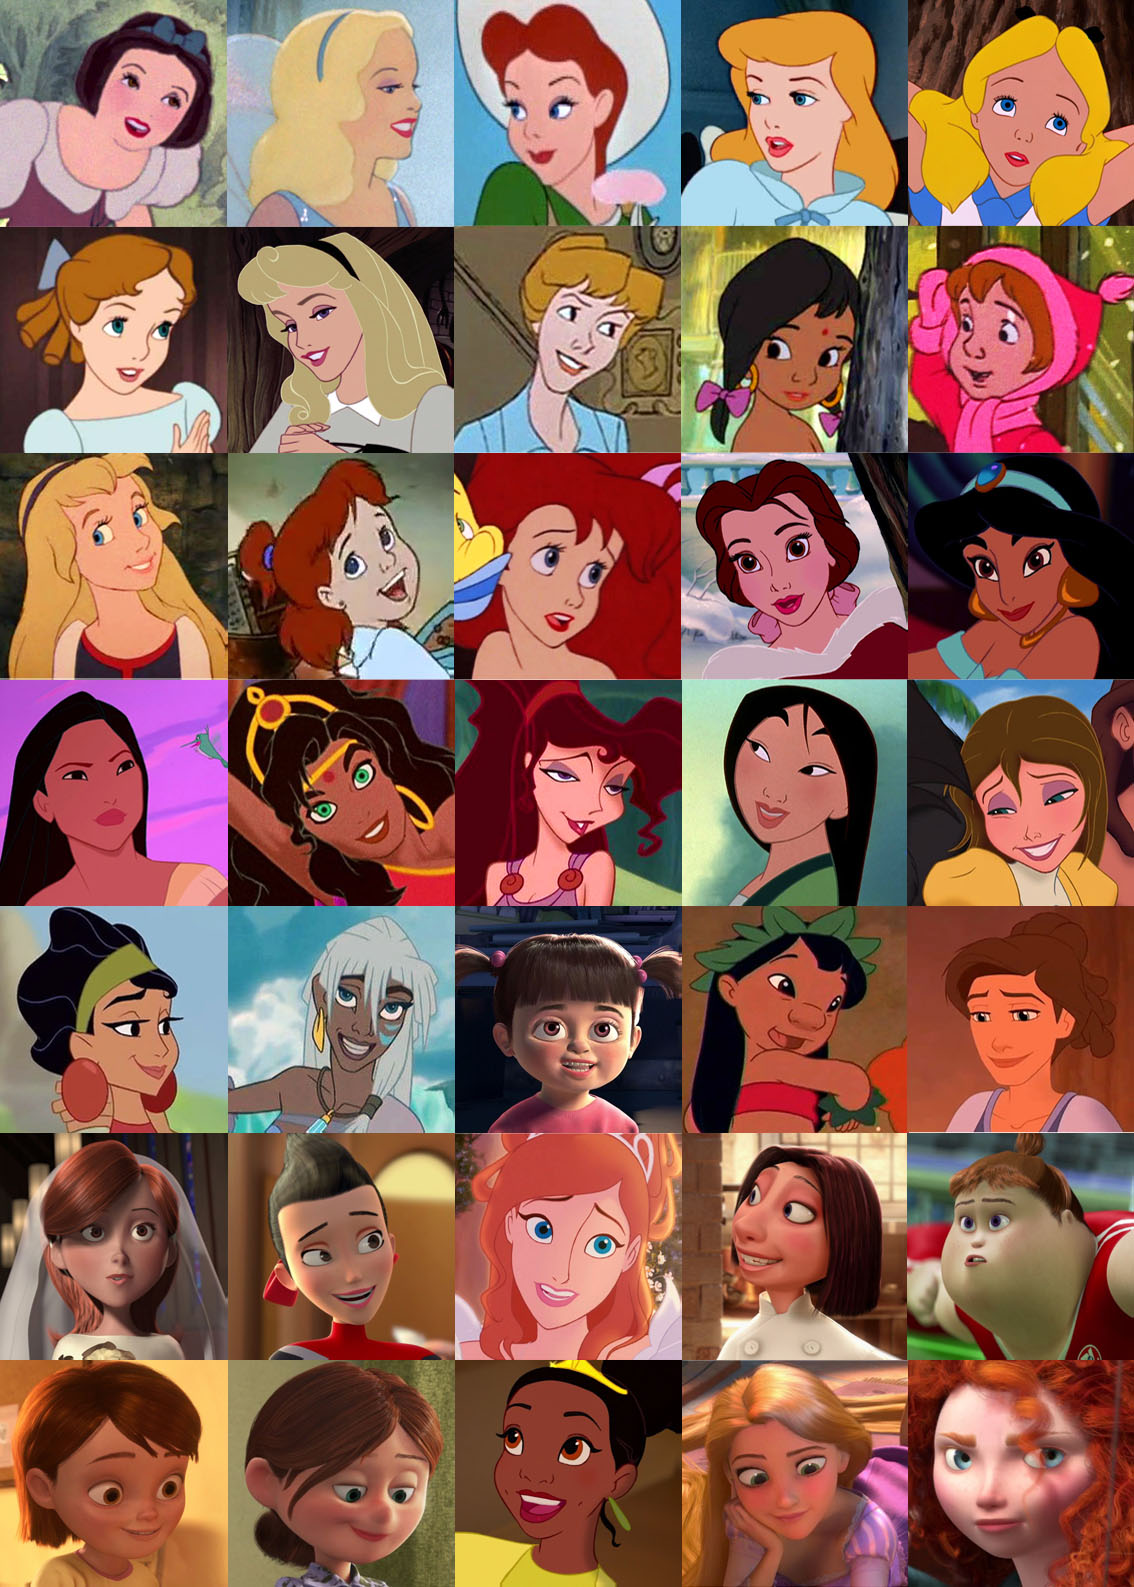 Disney human heroines from time to time